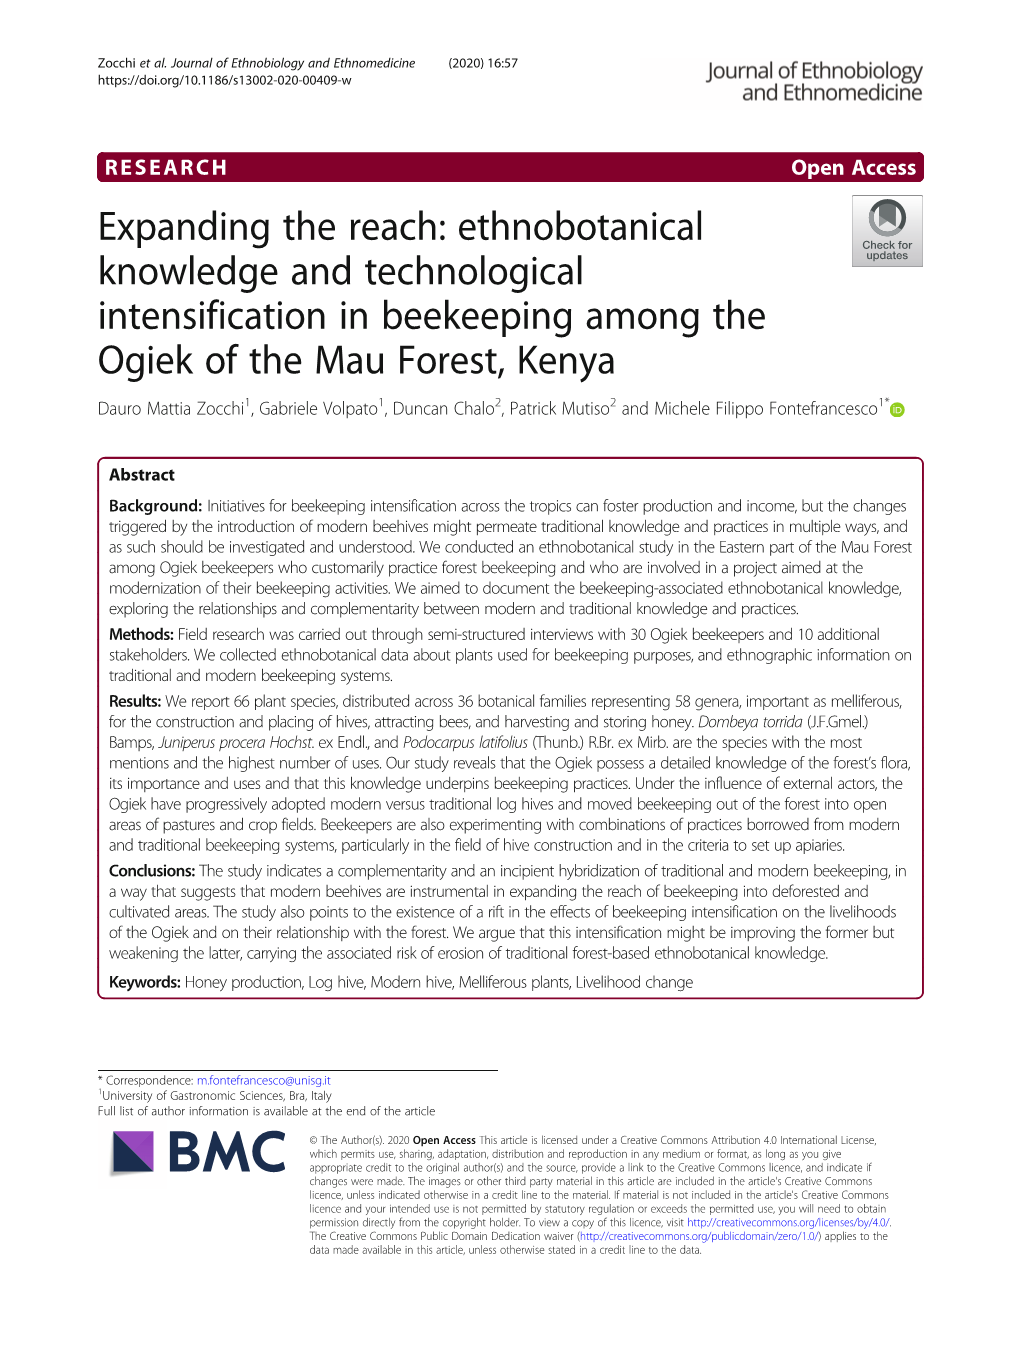 Expanding the Reach: Ethnobotanical Knowledge and Technological Intensification in Beekeeping Among the Ogiek of the Mau Forest